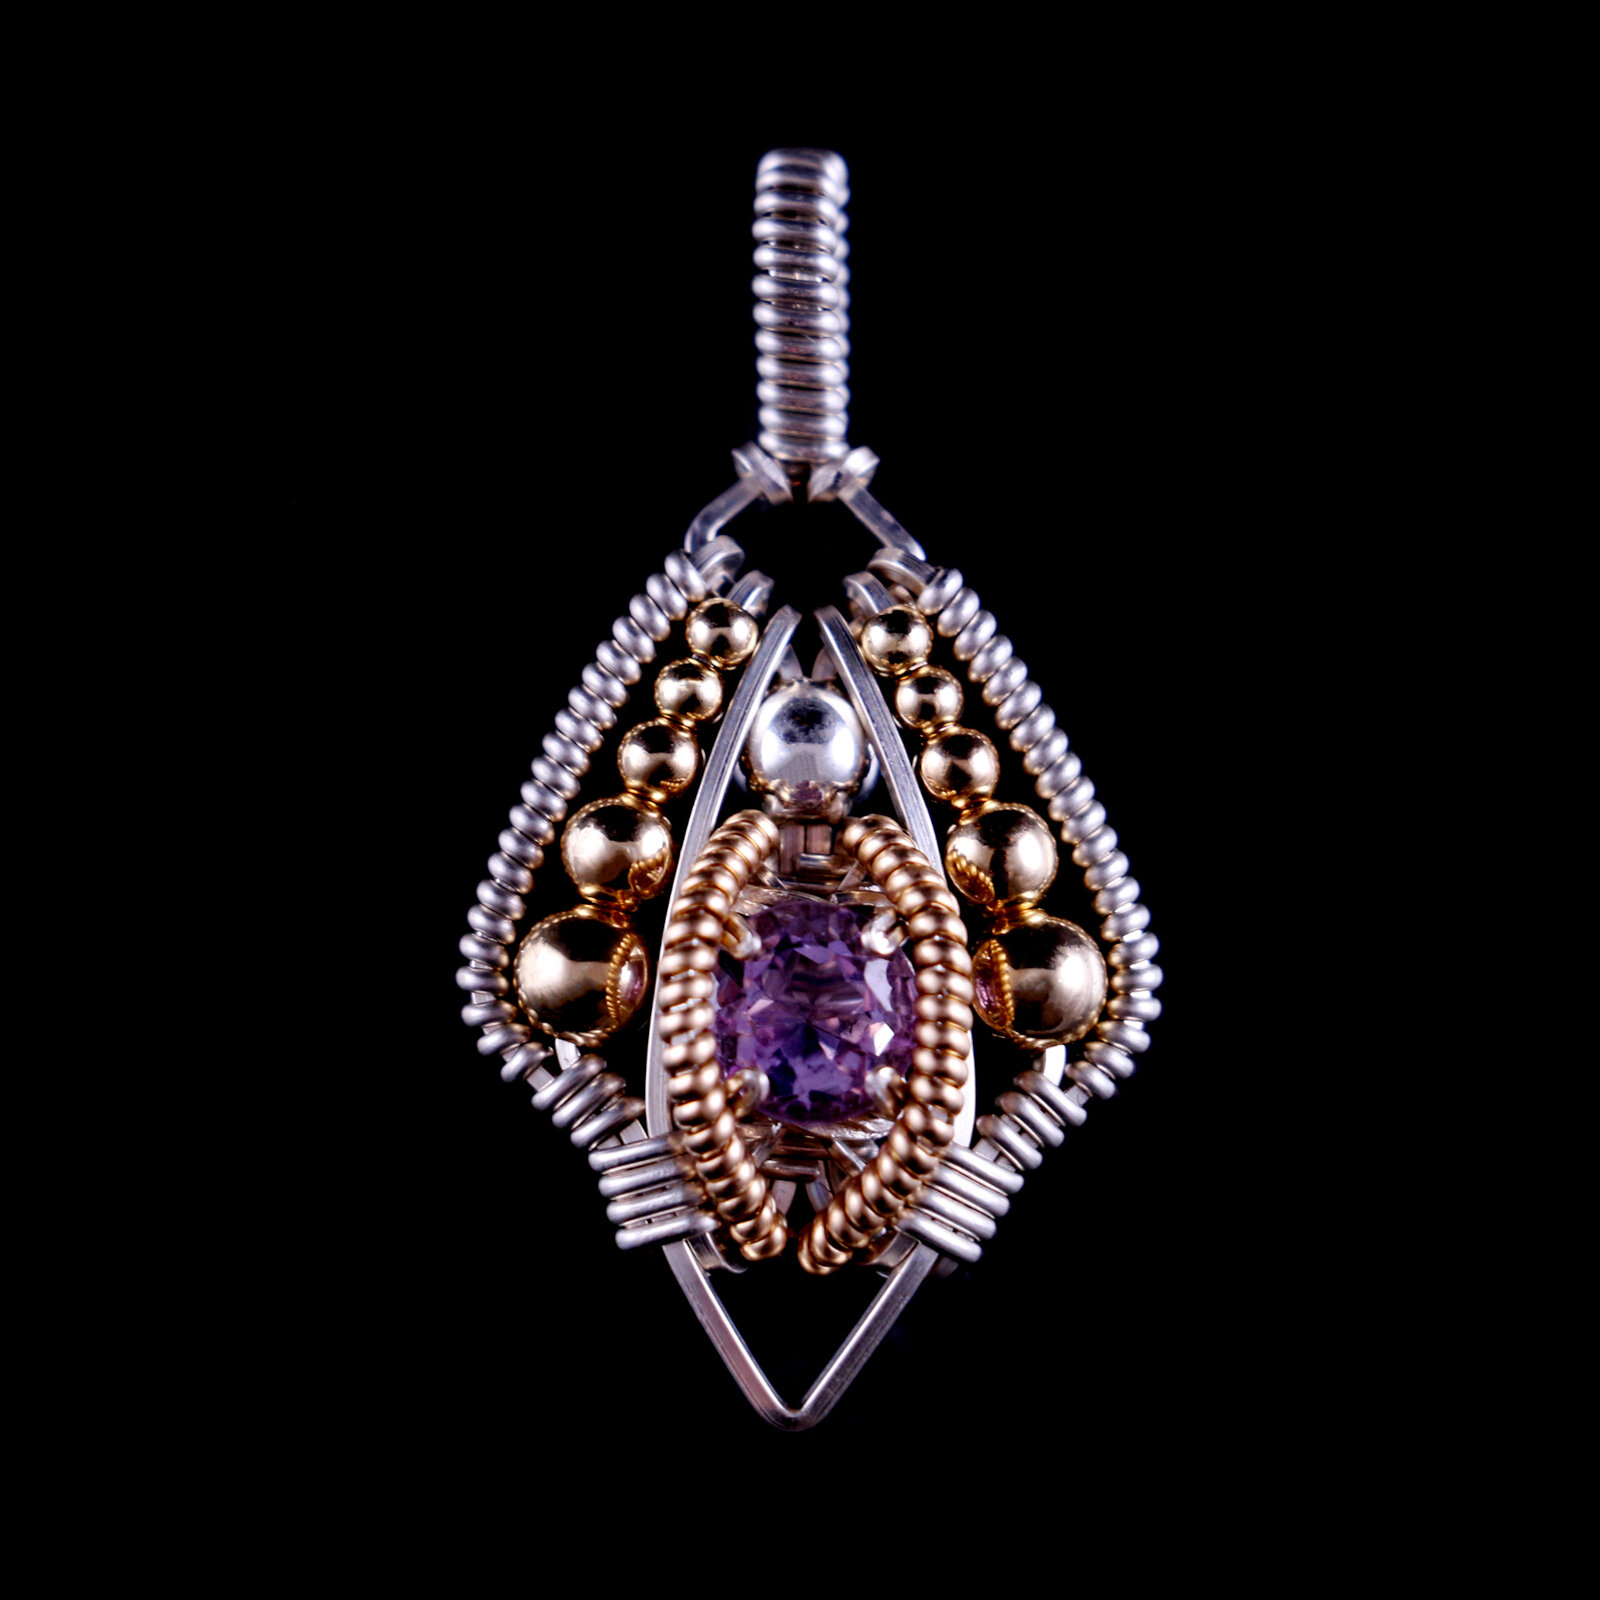 Pendant with faceted Brazilian Amethyst, Gold and Silver